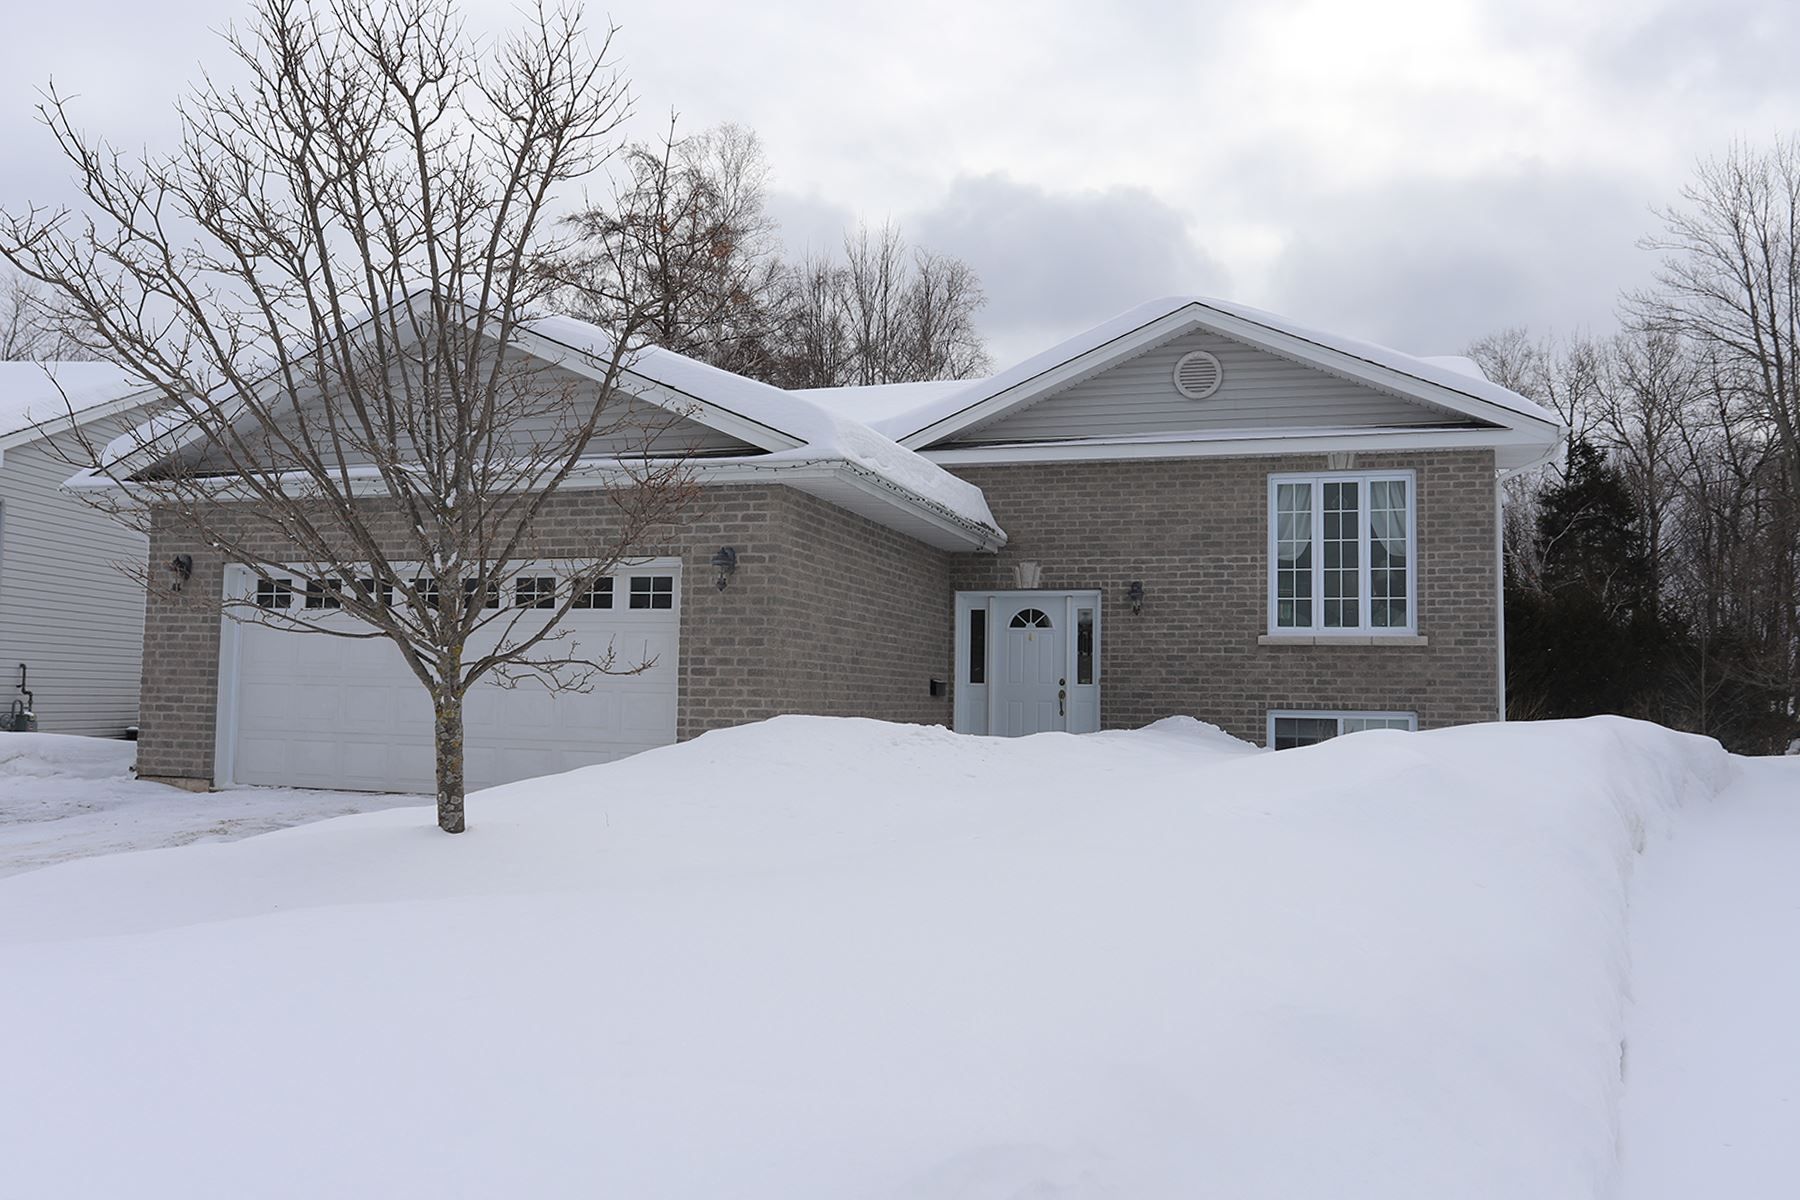 I have sold a property at 19 Parkinworth Place in Sault Ste. Marie
